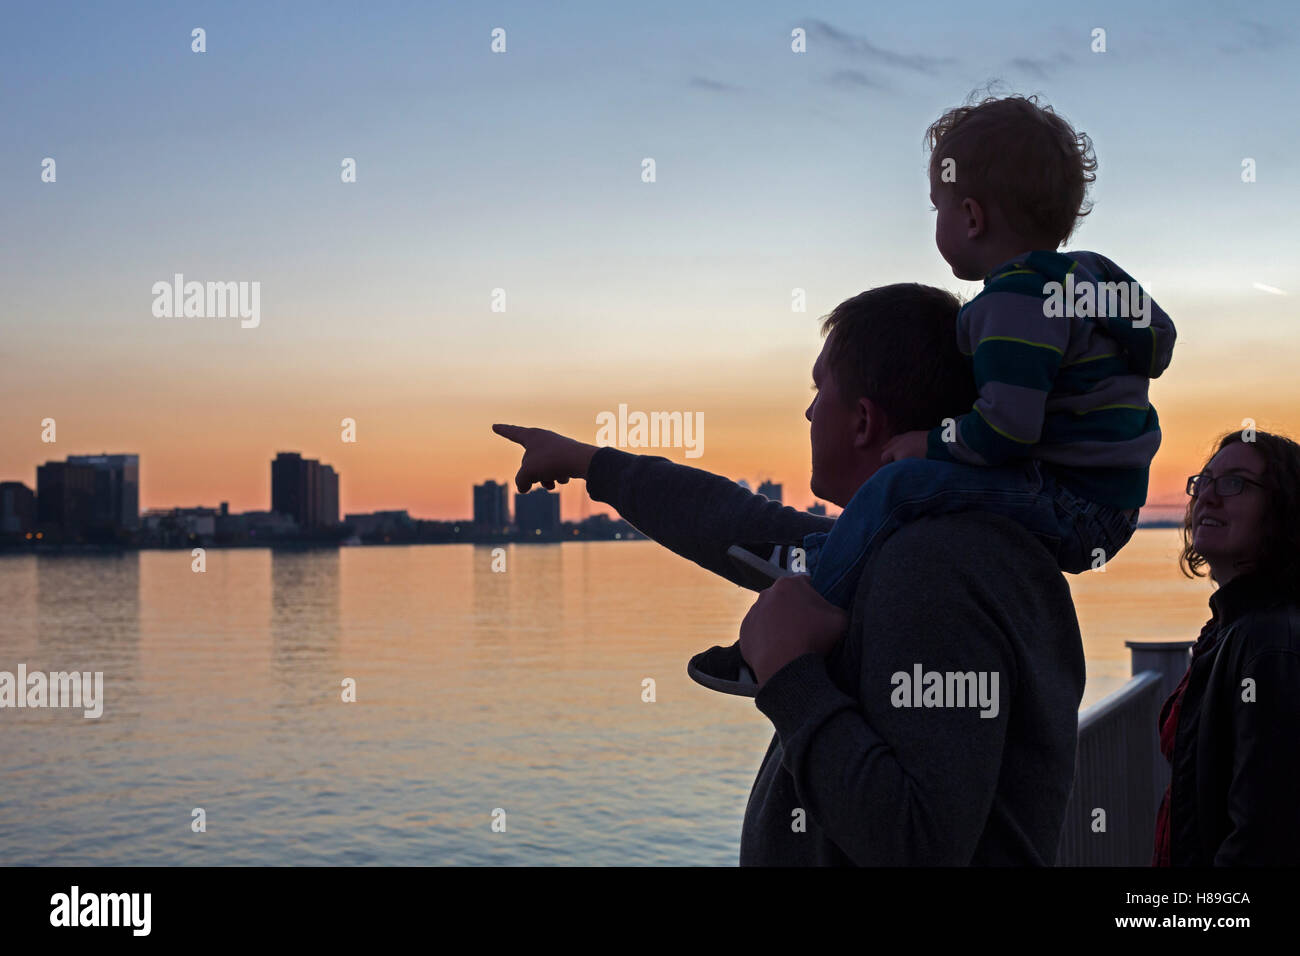 Detroit, Michigan - Dad points across the Detroit River to Canada, with his son and wife. Stock Photo